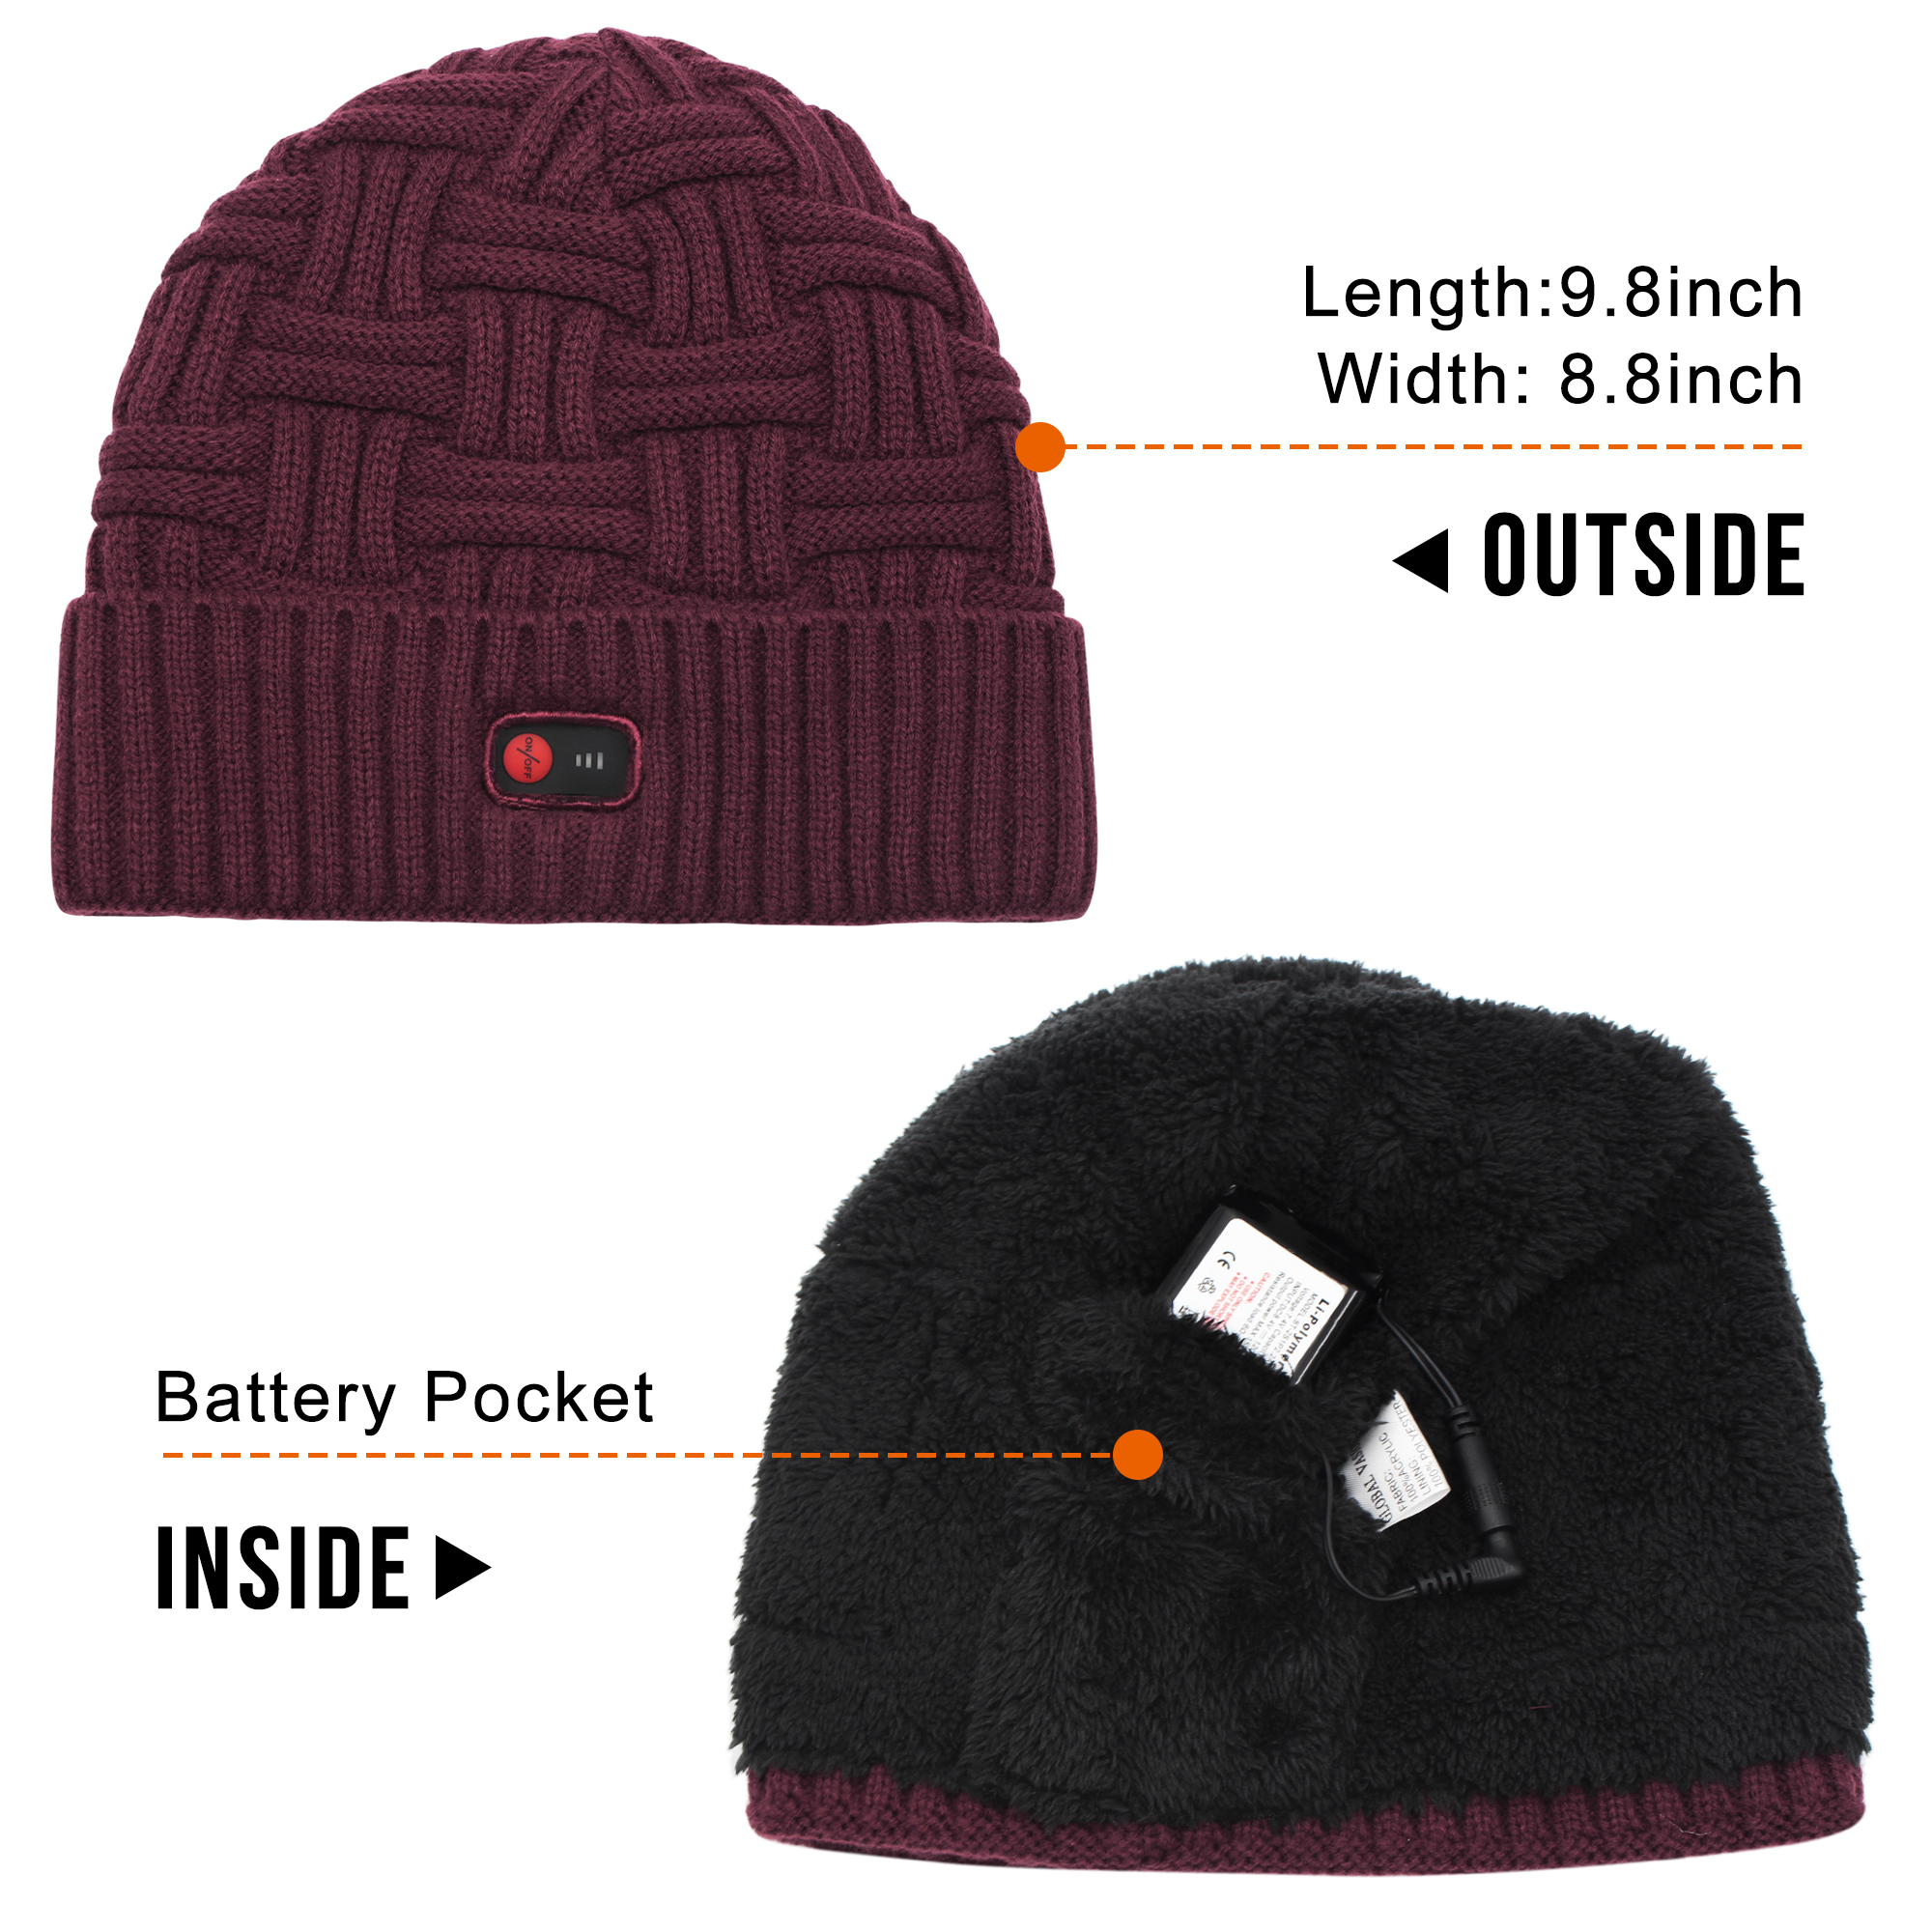 Global Vasion Battery Heated Hat Rechargeable Operated Winter Warming Women Men Heating Warmers Beanie